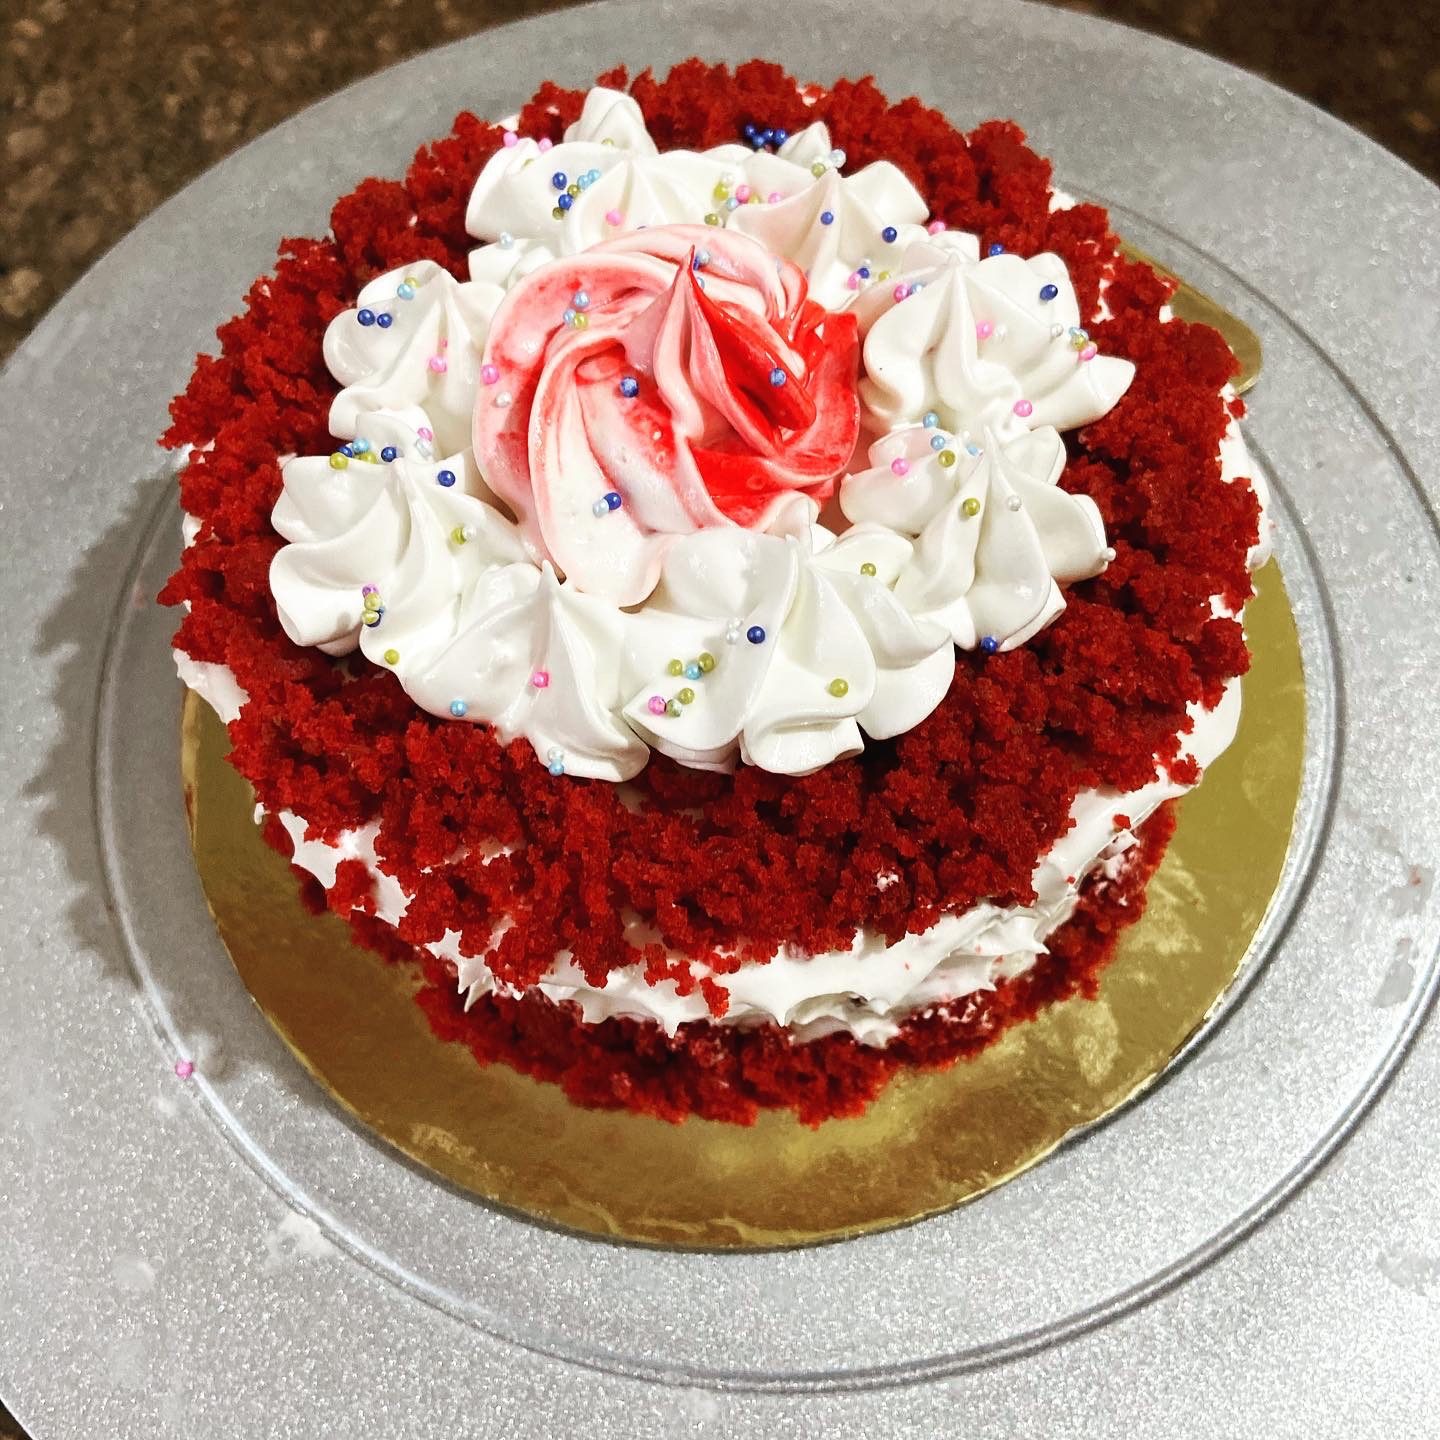 Red velvet cake (with cream cheese) Designs, Images, Price Near Me